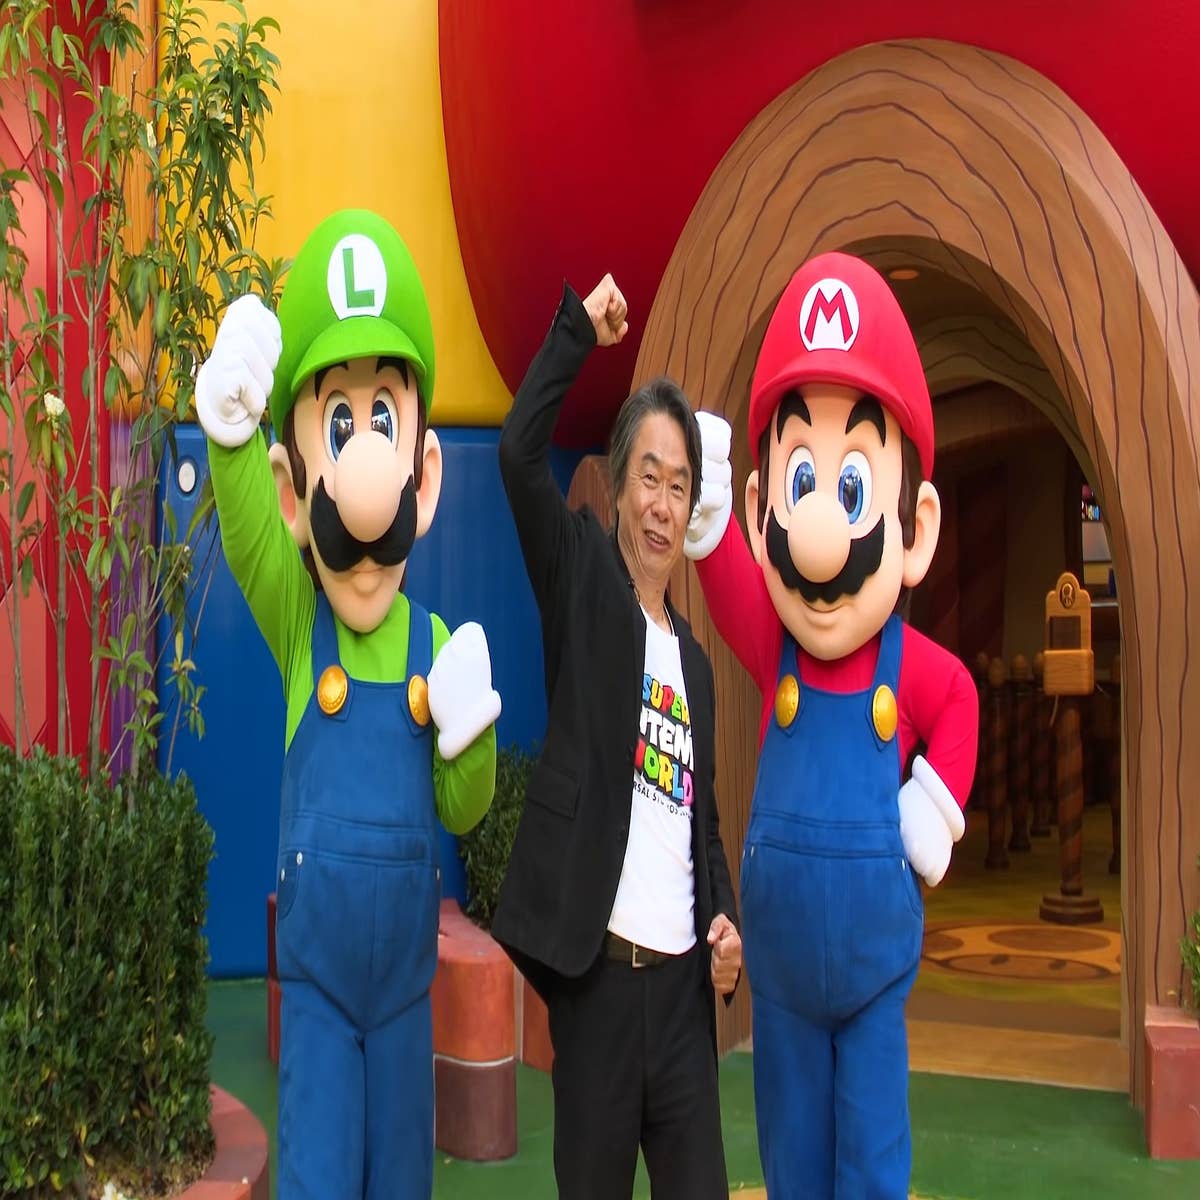 Los Angeles, California, USA 1st April 2023 Actor Chris Pratt and  Producer/CEO of Nintendo, Creator of Mario, Shigeru Miyamoto attend a  Special Screening of Universal Pictures' The Super Mario Bros at Regal